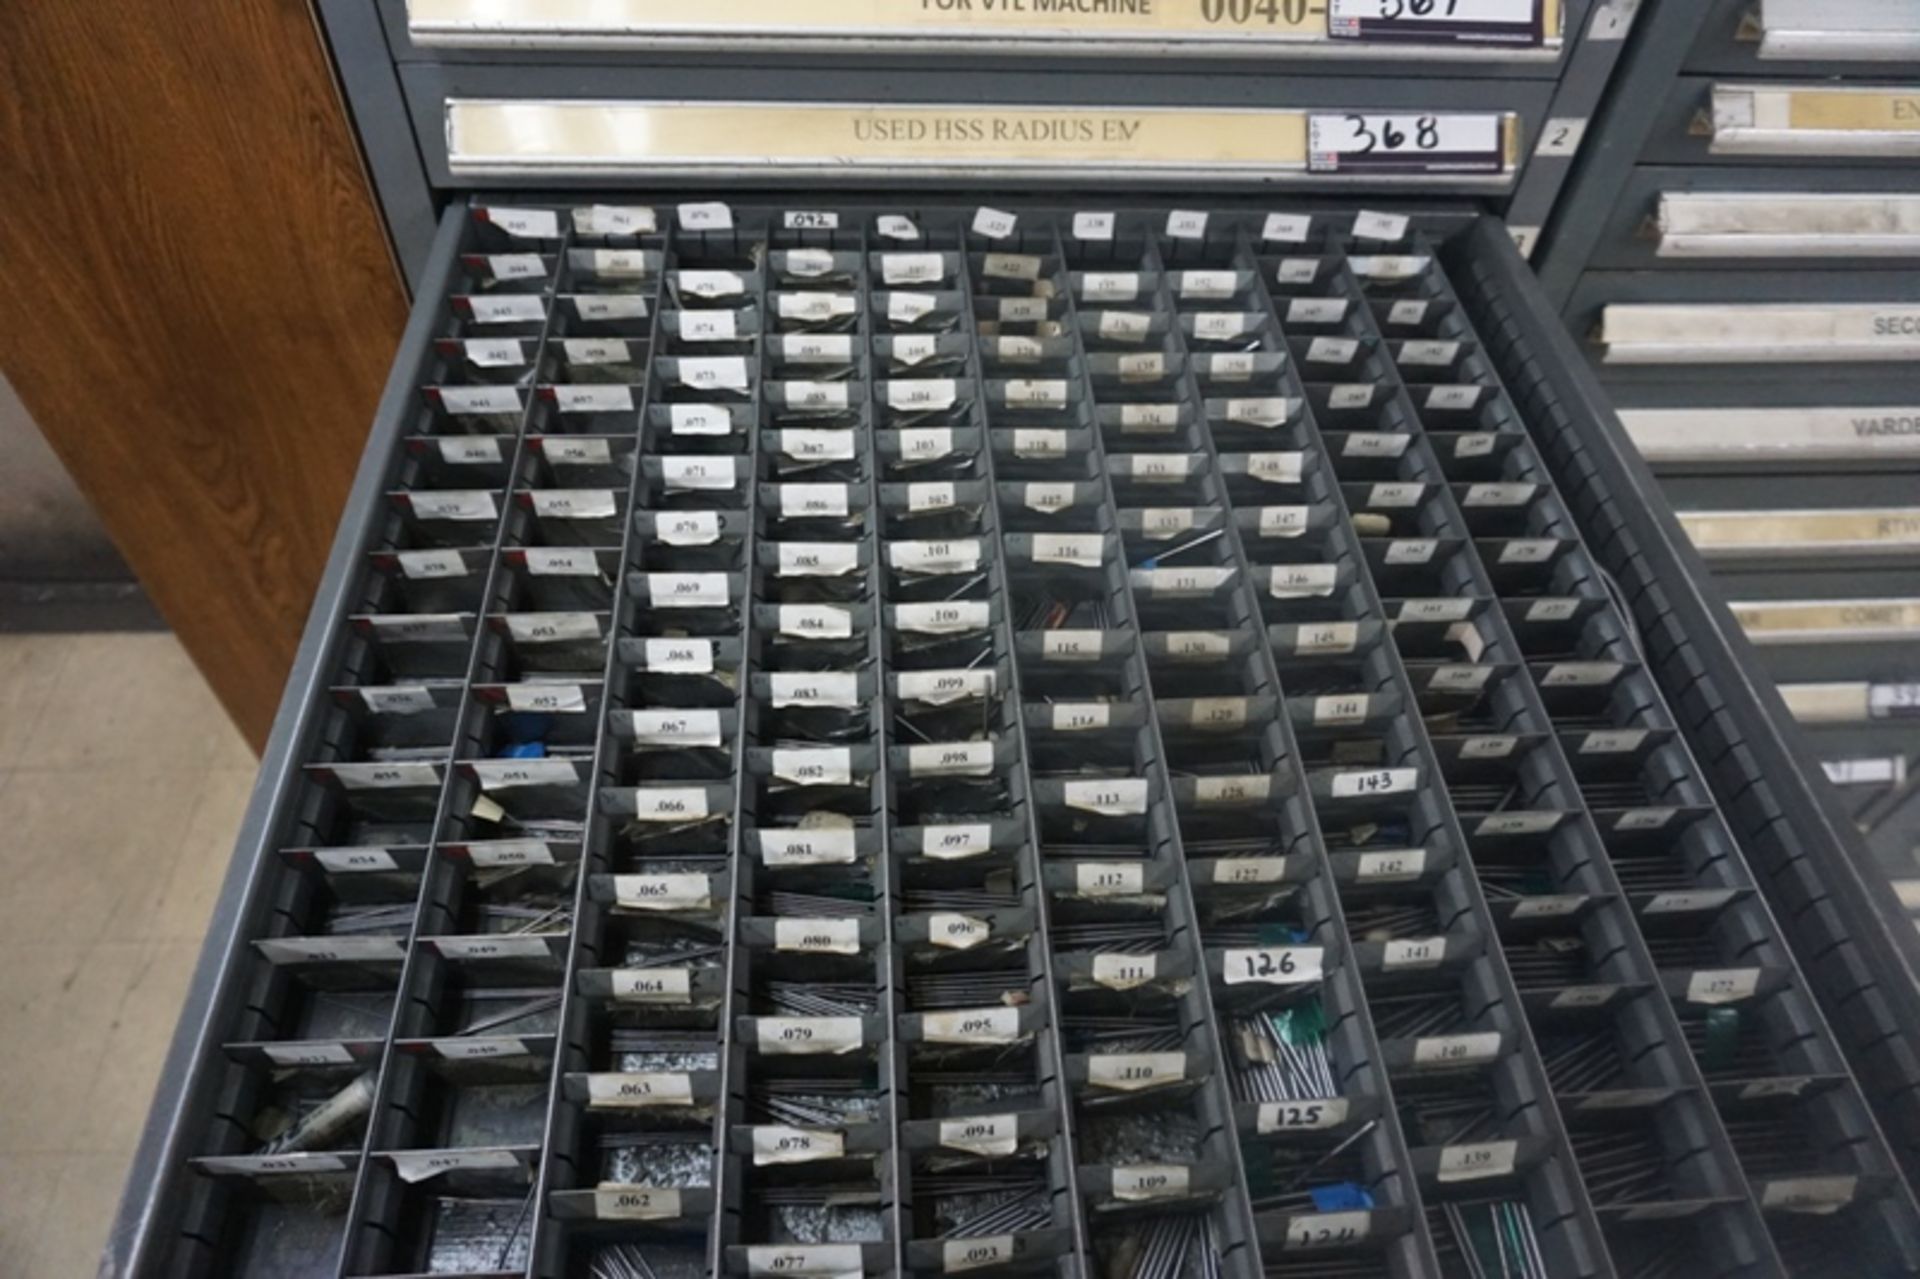 Drawer with Assorted Gage Pins